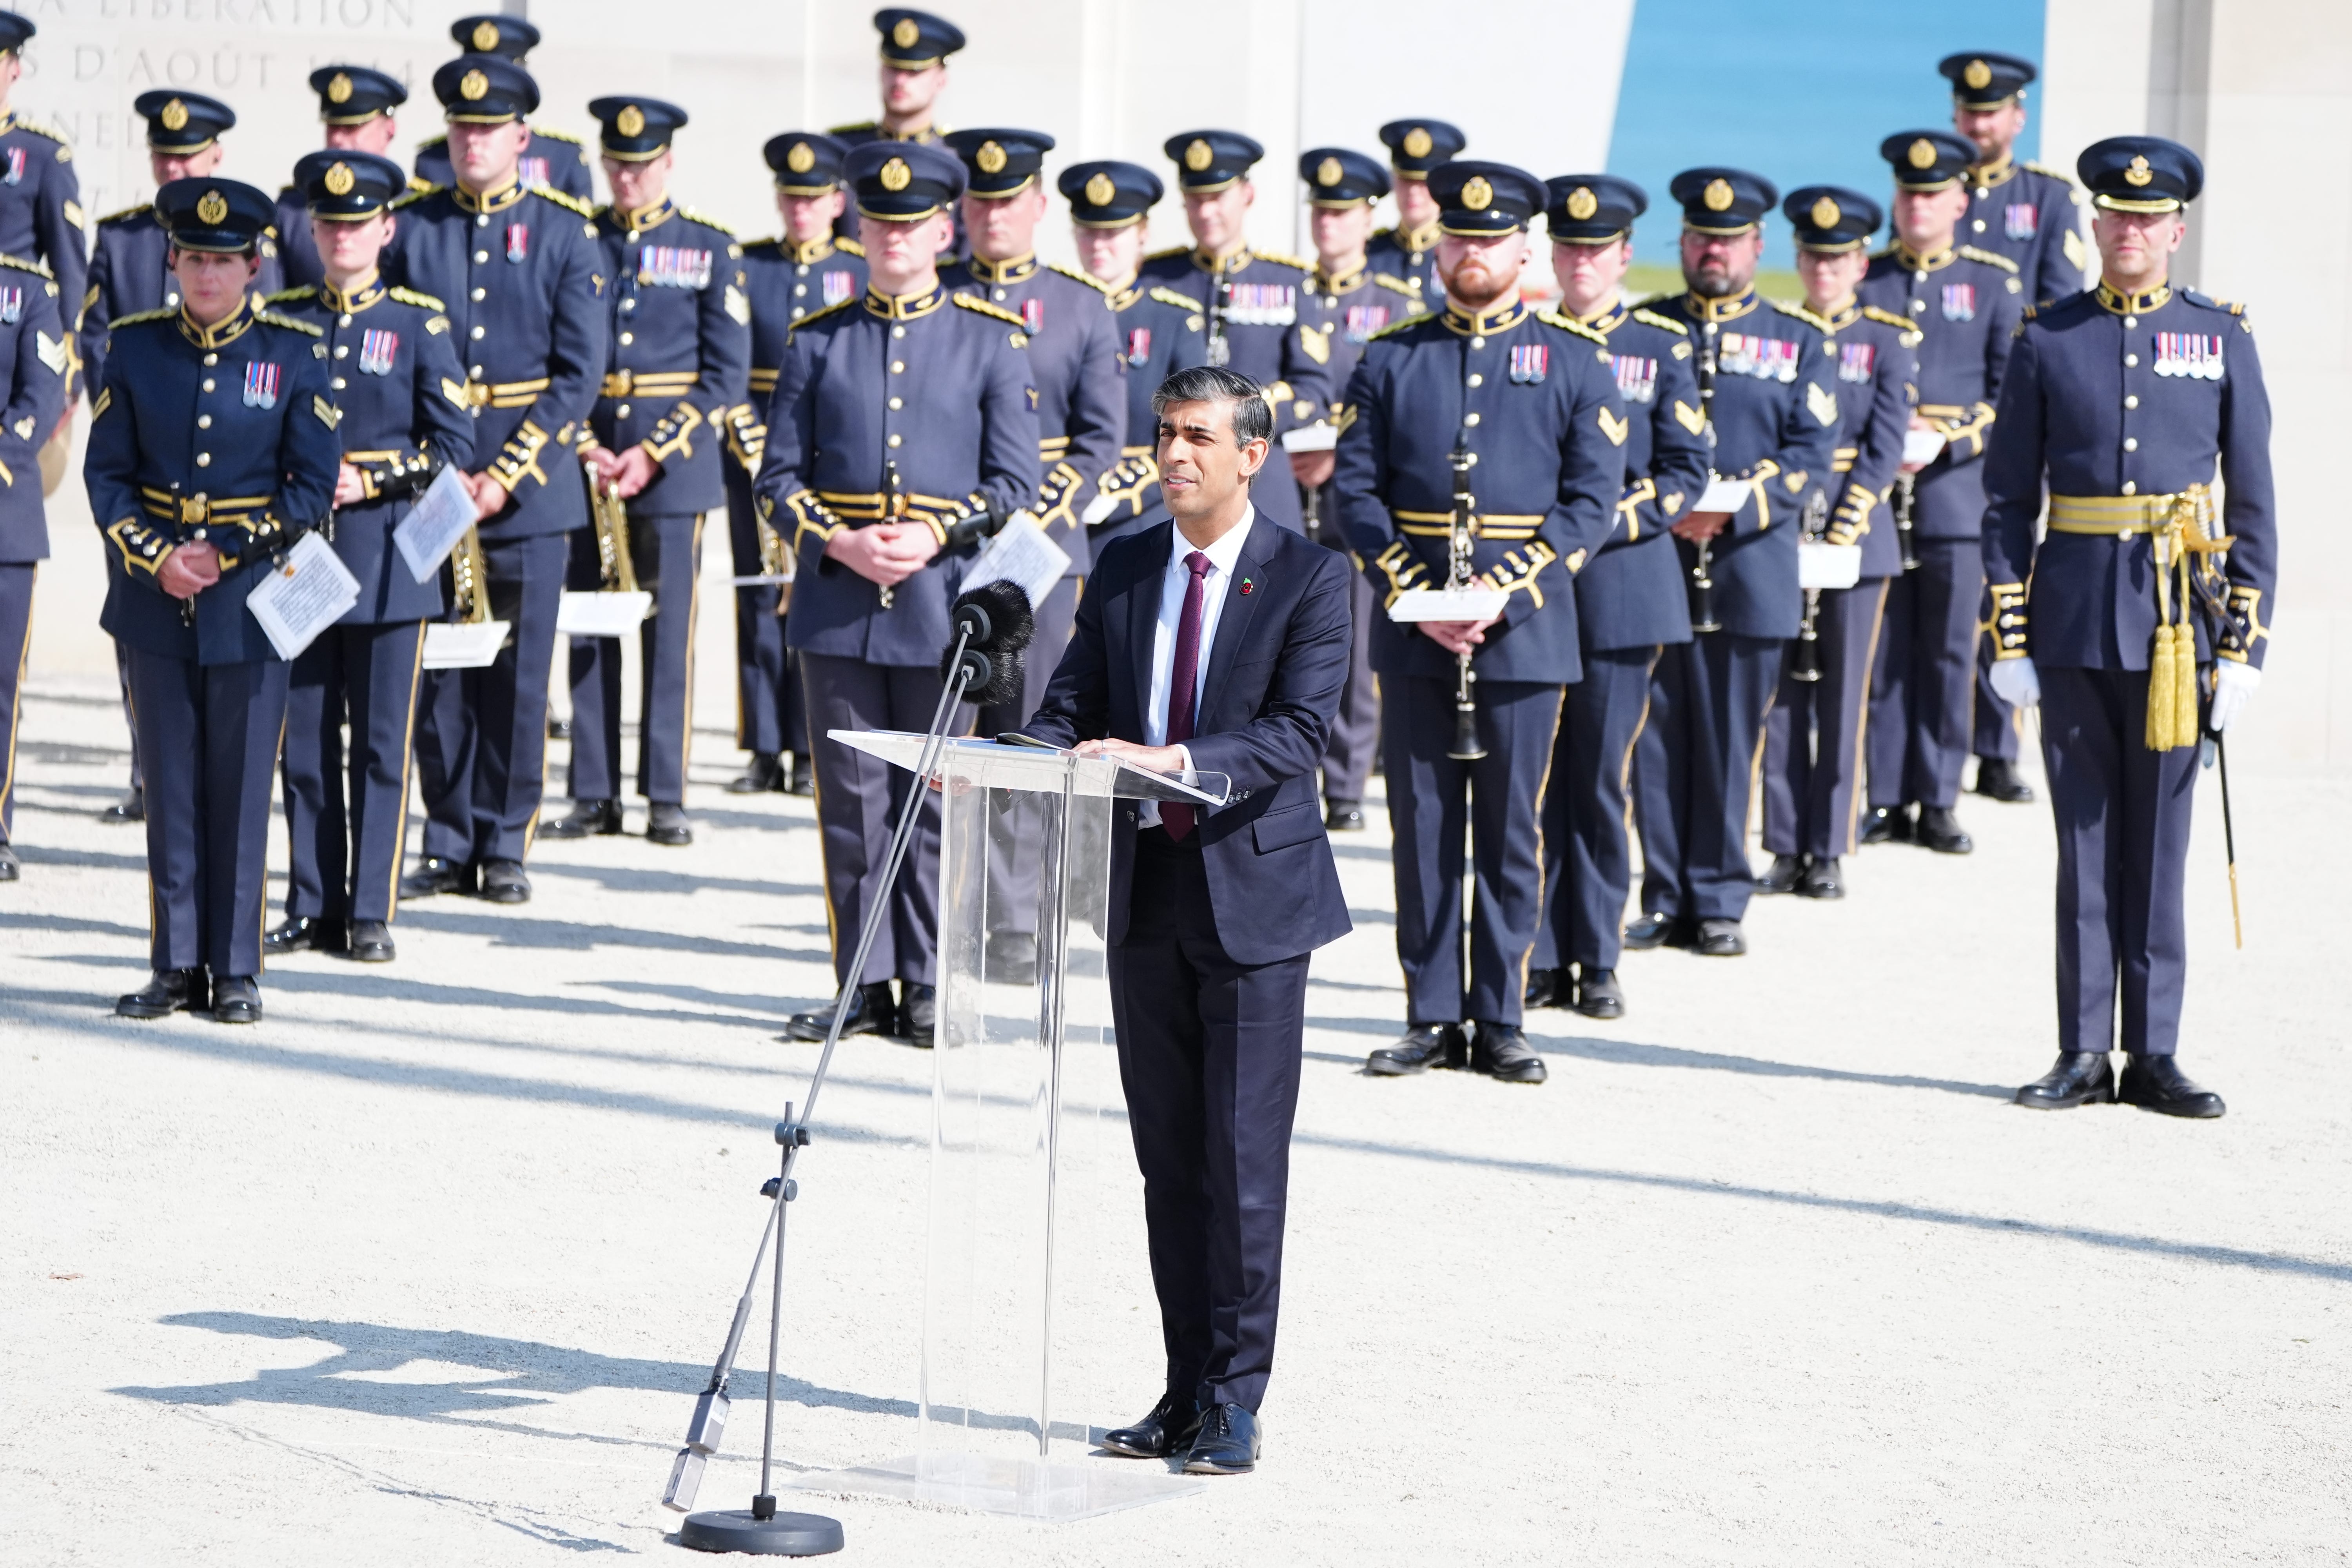 Prime Minister Rishi Sunak speaking during the UK national commemorative event for the 80th anniversary of D-Day, held at the British Normandy Memorial in Ver-sur-Mer, Normandy. He later returned early to the UK. (Jane Barlow/PA)